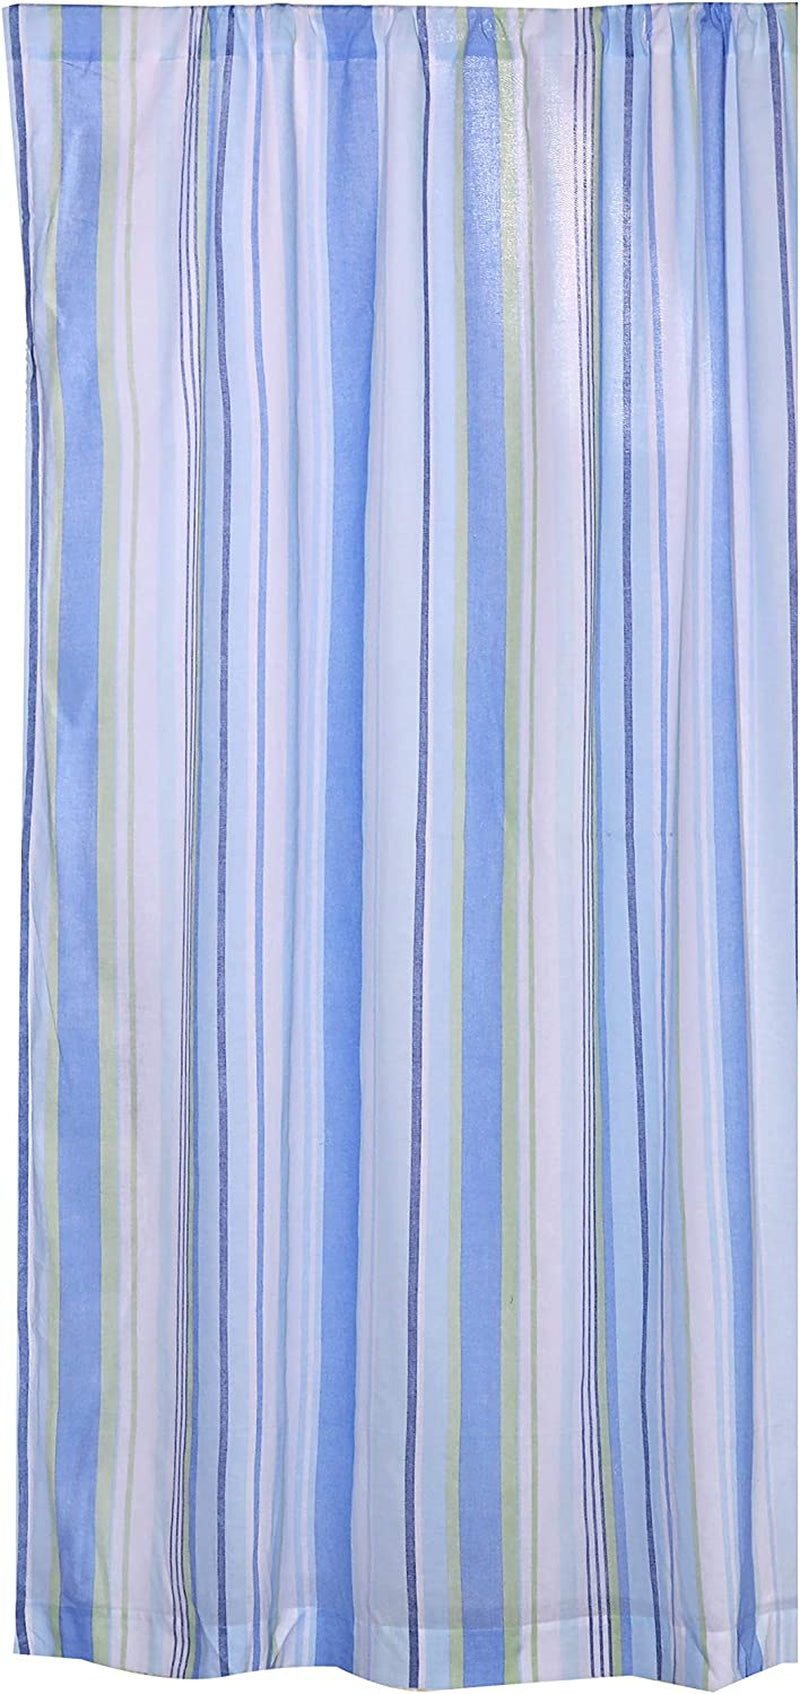 Levtex Home - Catalina - Drape Panel/Curtain (55X84In.) Set of 2 with Rod Pocket - Striped Coastal Pattern in Blues and Greens - White, Green, Blues - Cotton Fabric